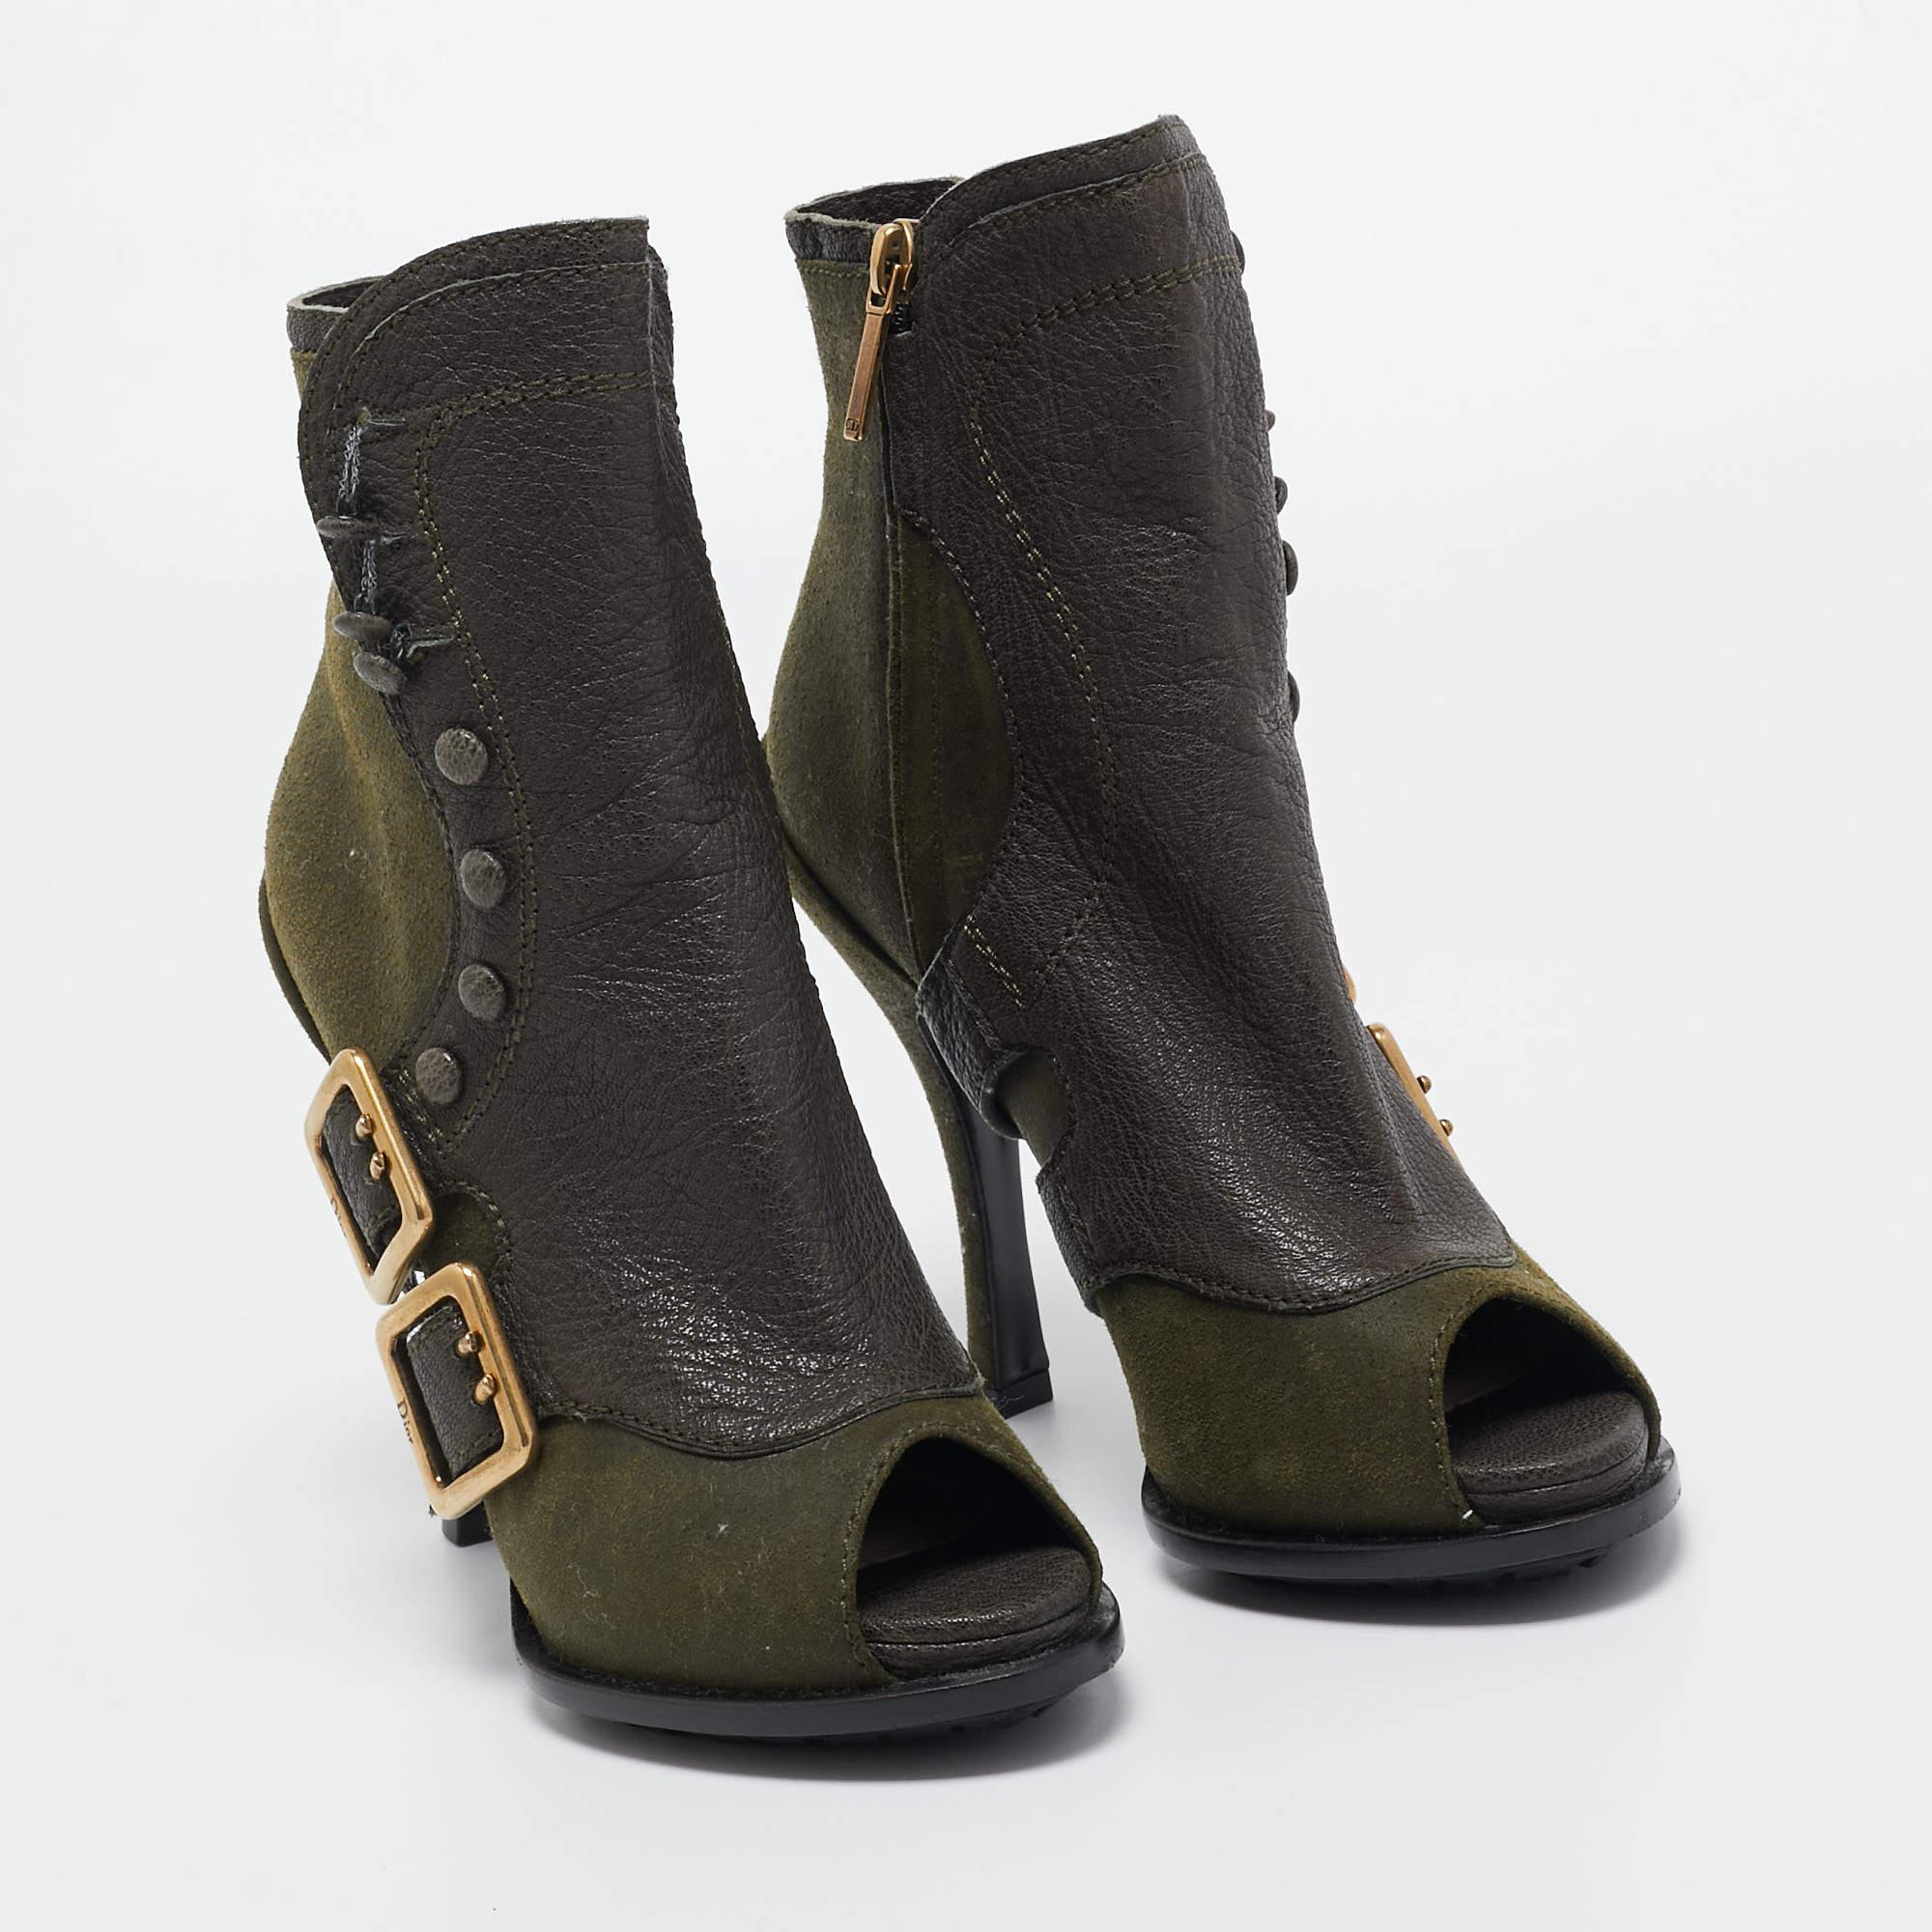 Dior Green Suede and Leather Peep Toe Ankle Boots Size 35.5 In Excellent Condition For Sale In Dubai, Al Qouz 2